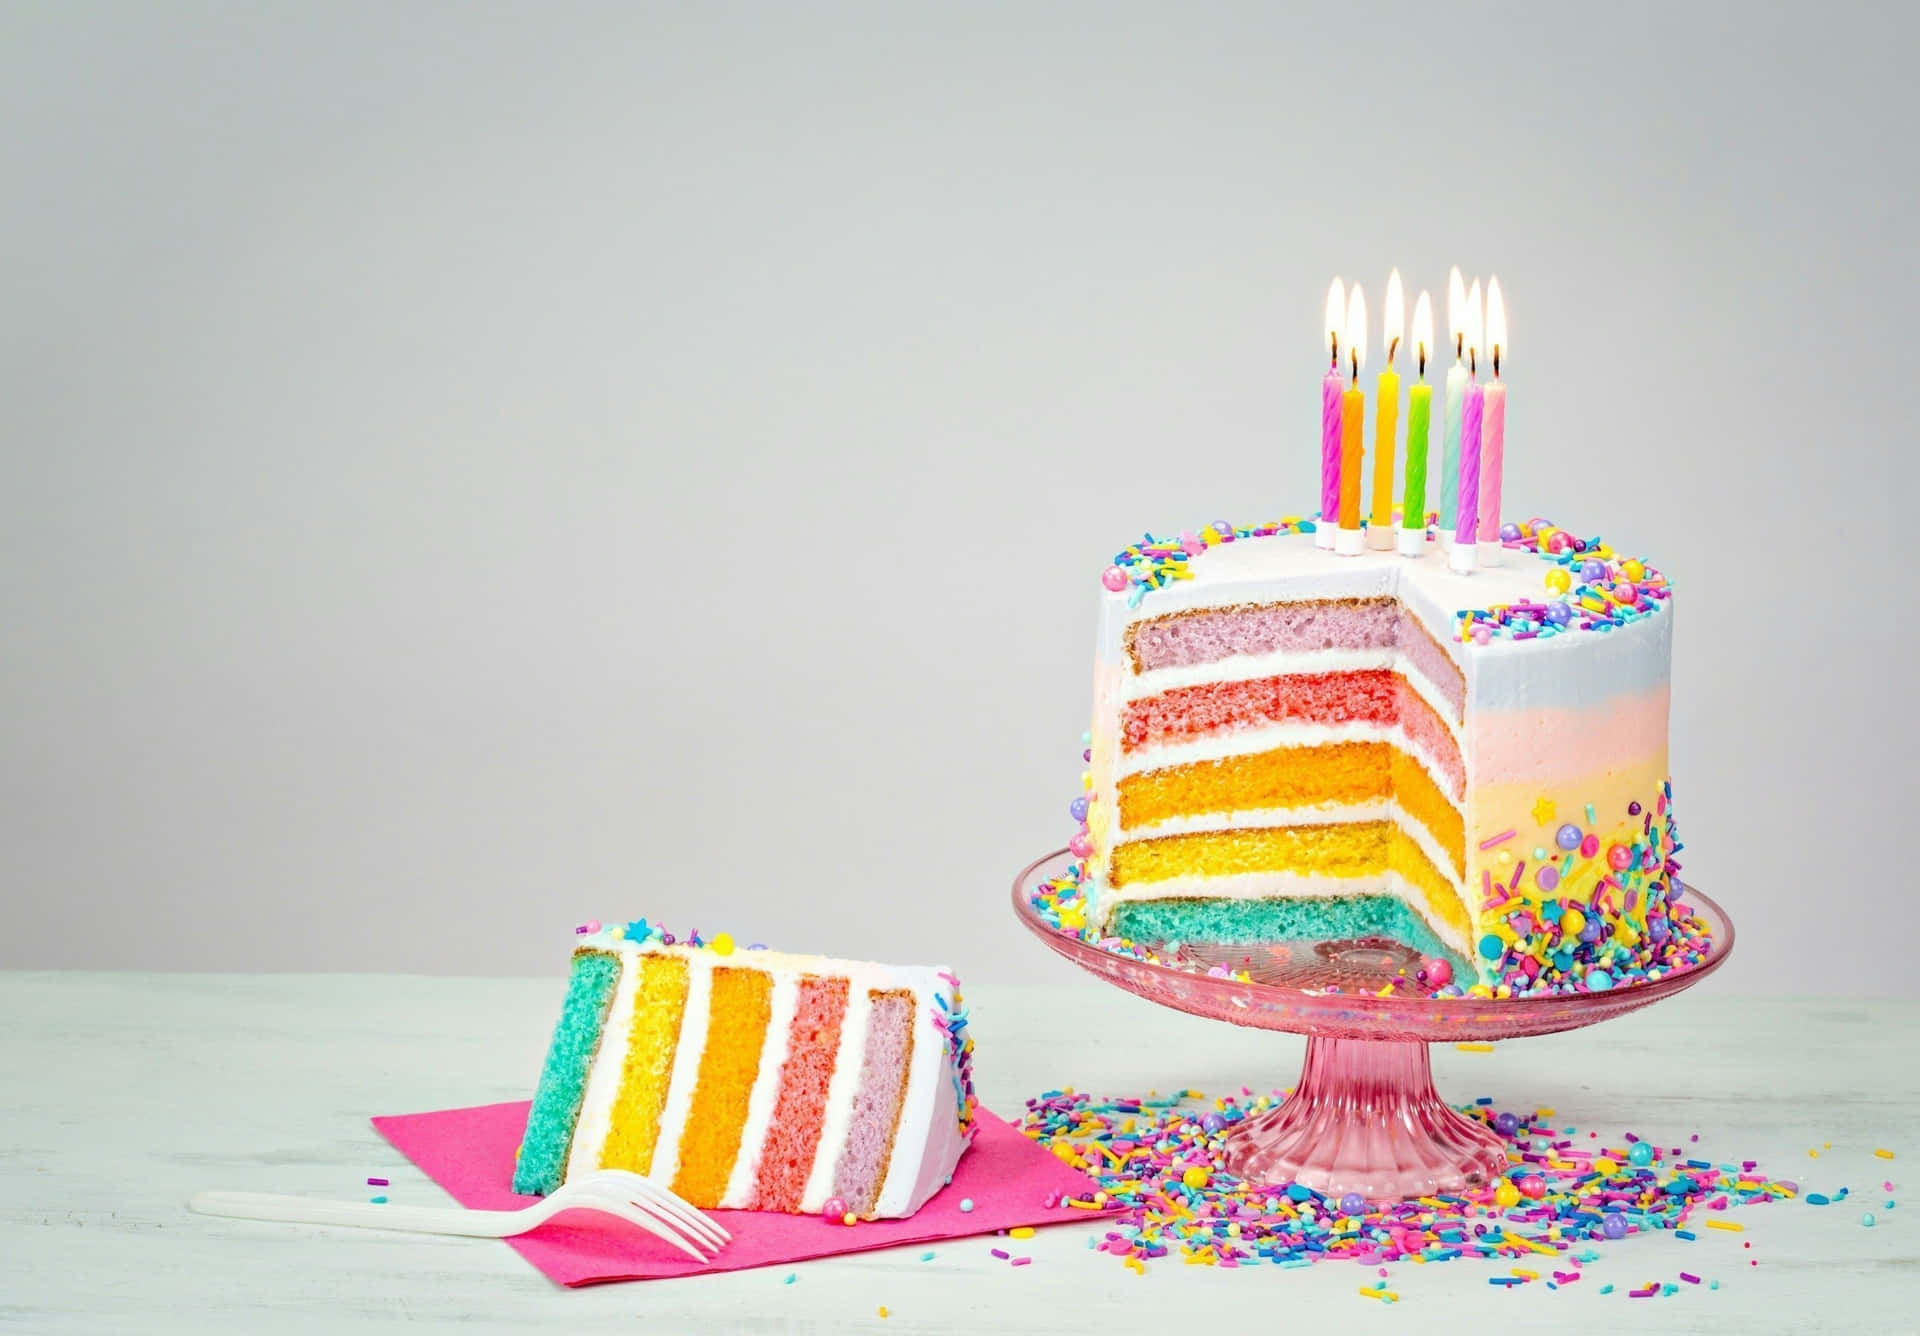 Celebrate a special occasion with a delicious and beautiful birthday cake